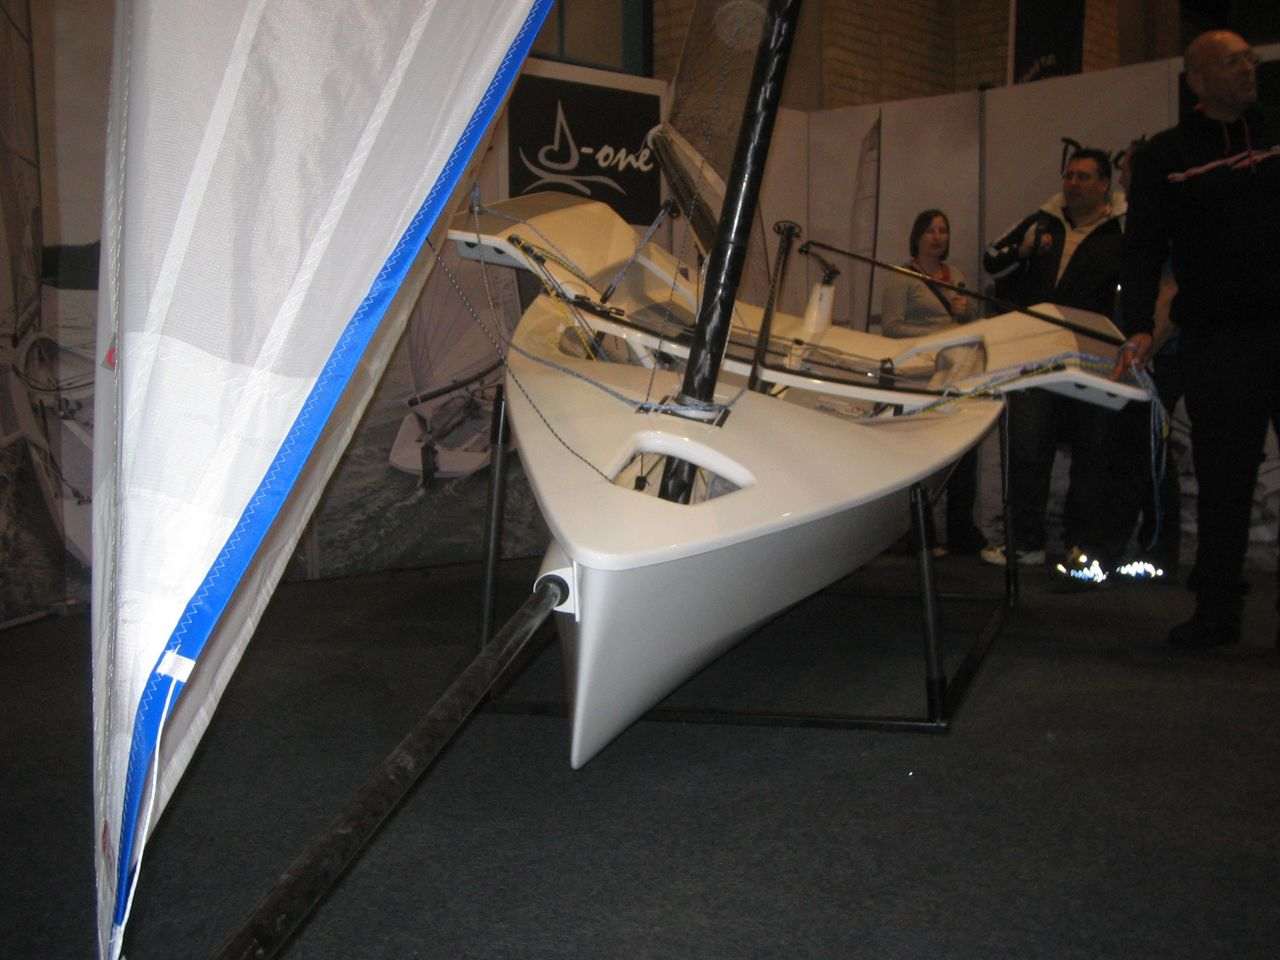 Devoti D-1 at the Dinghy Show in London